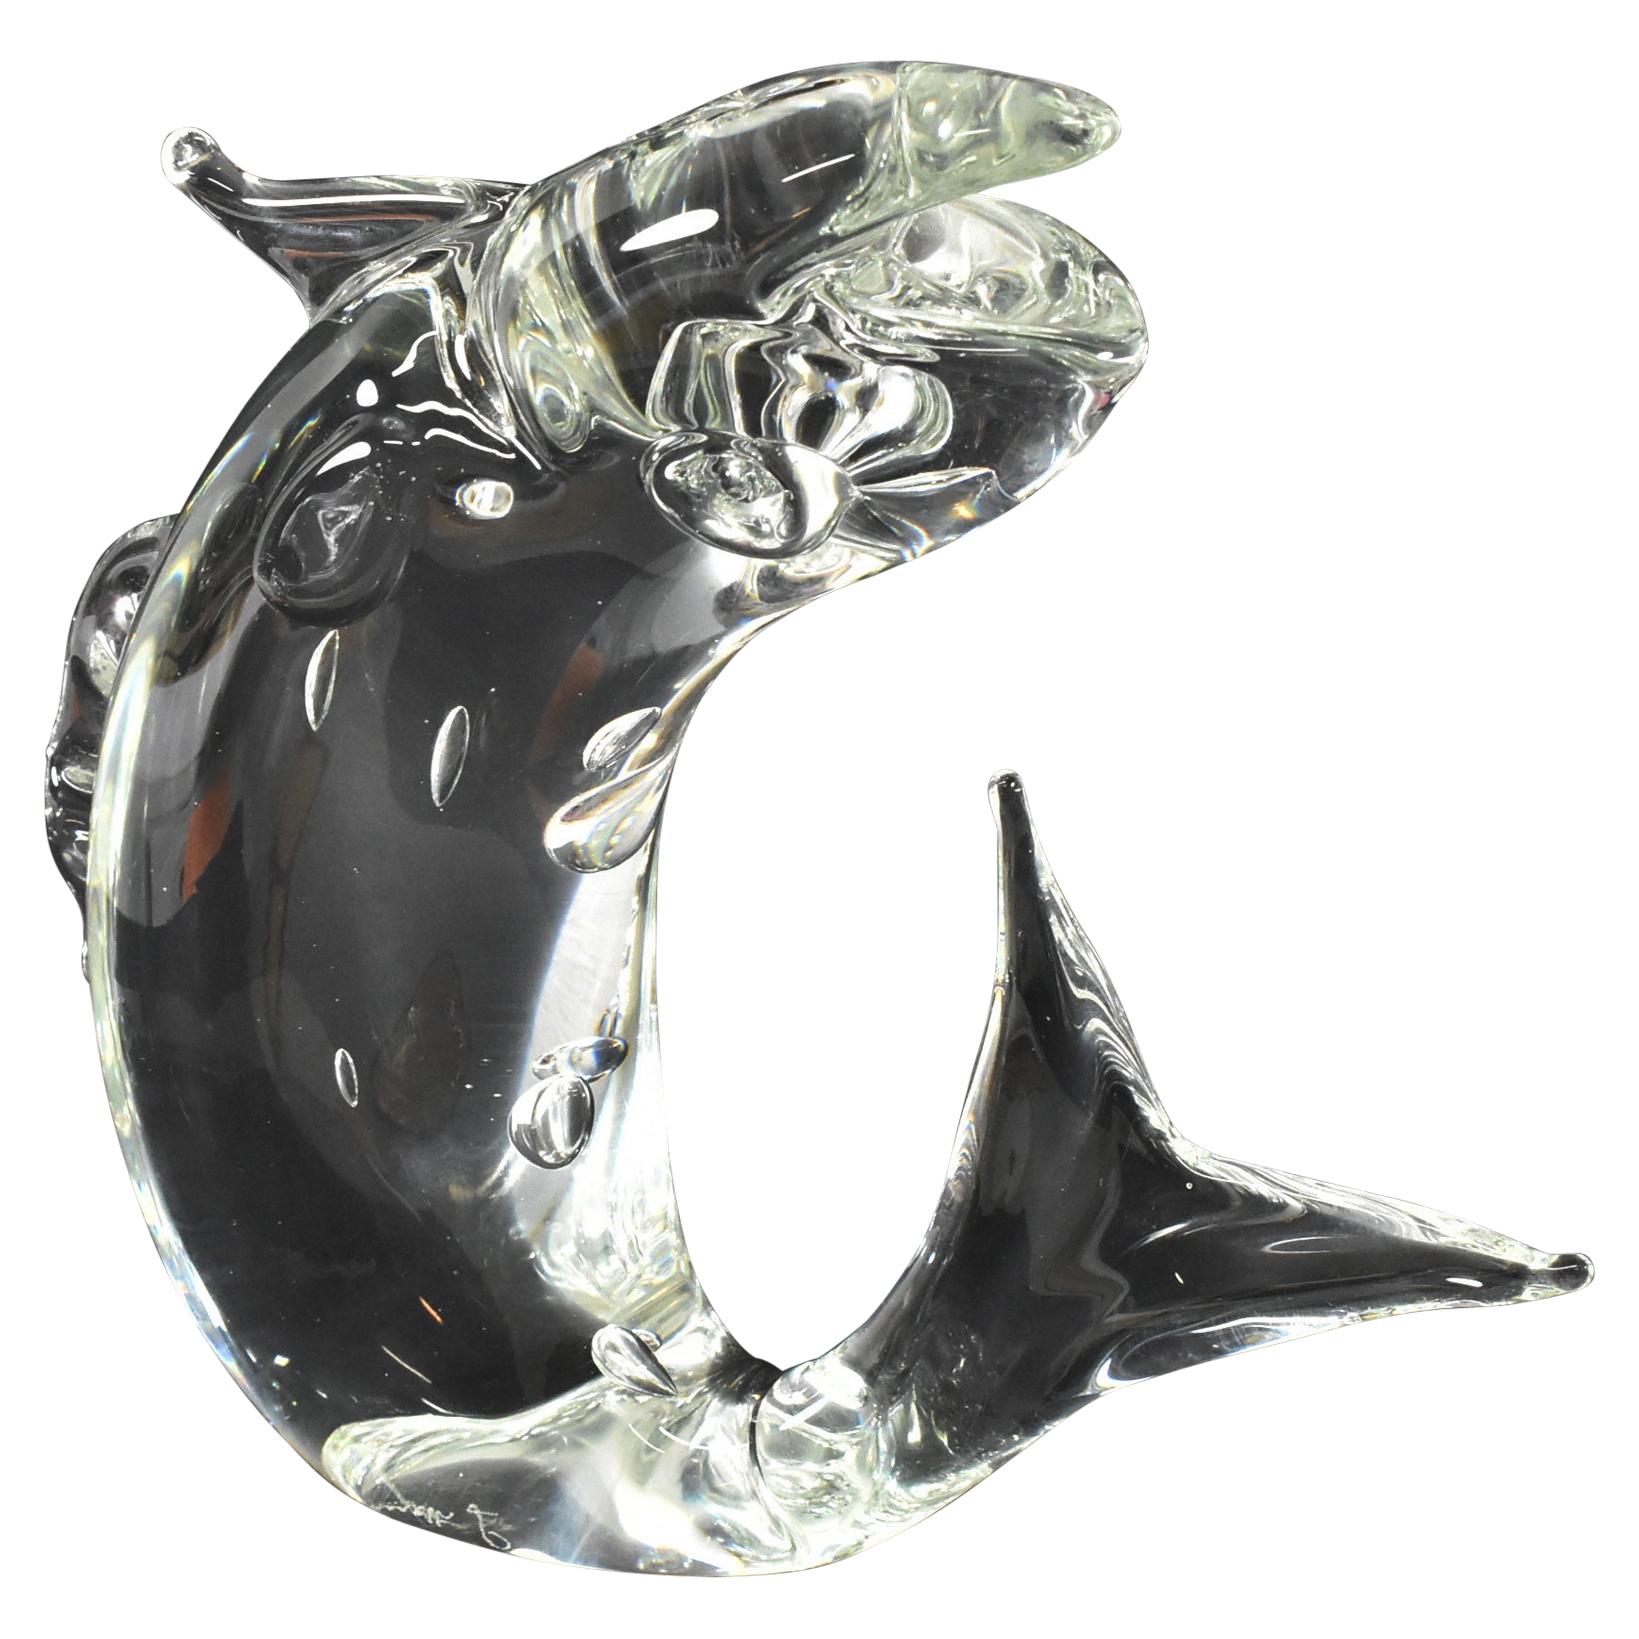 Hand blown Murano art glass trout fish sculpture. Colorless glass with controlled air bubbles. Ground polished pontil signed in script Lucio Zanetti. Light wear to bottom. No chips. Dimensions: 2.5